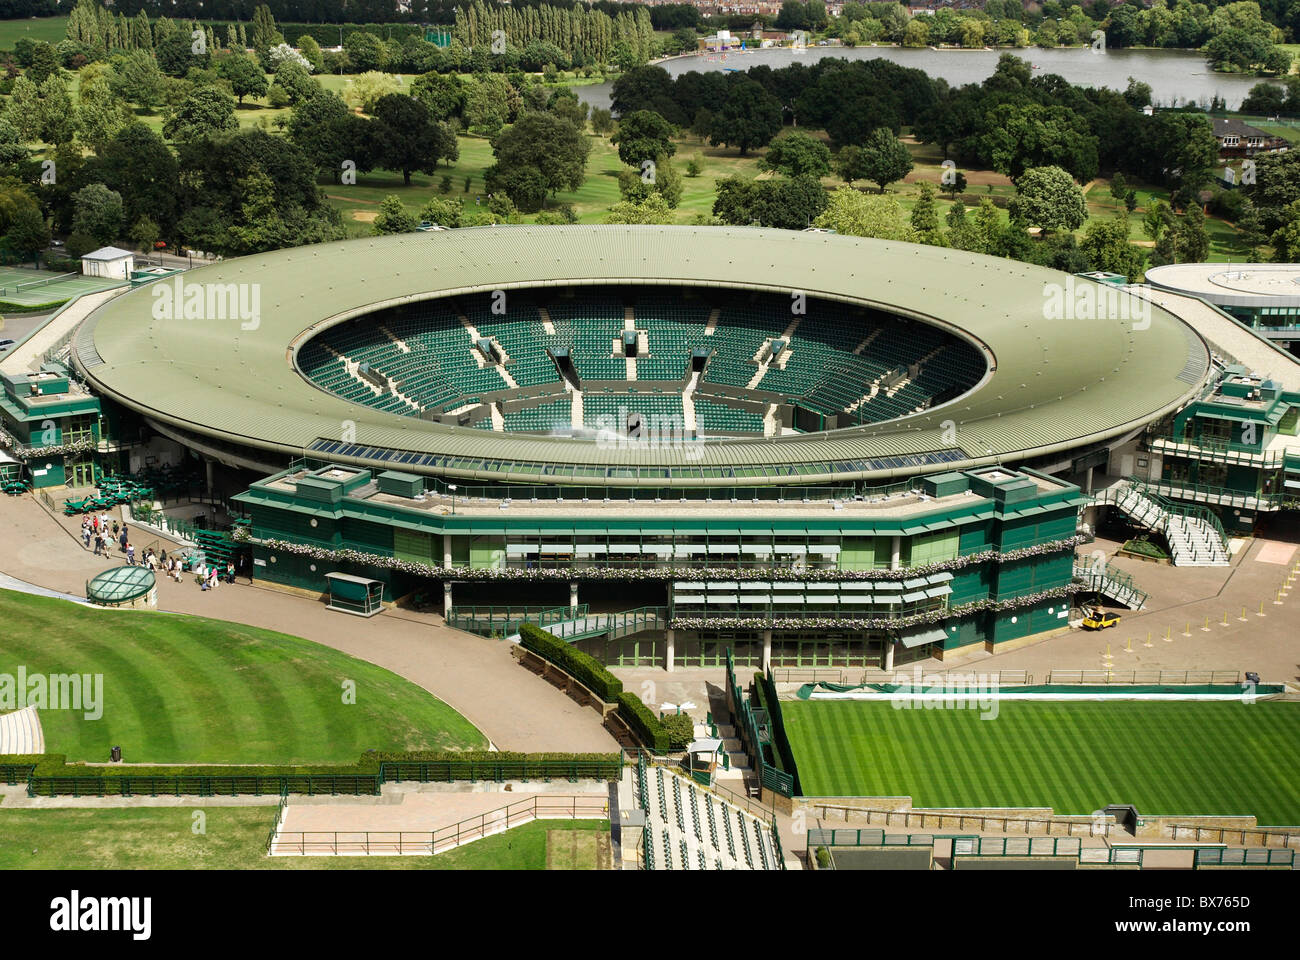 No. 1 Court All England Lawn Tennis Club Wimbledon London UK 2008 elevated  view Stock Photo - Alamy